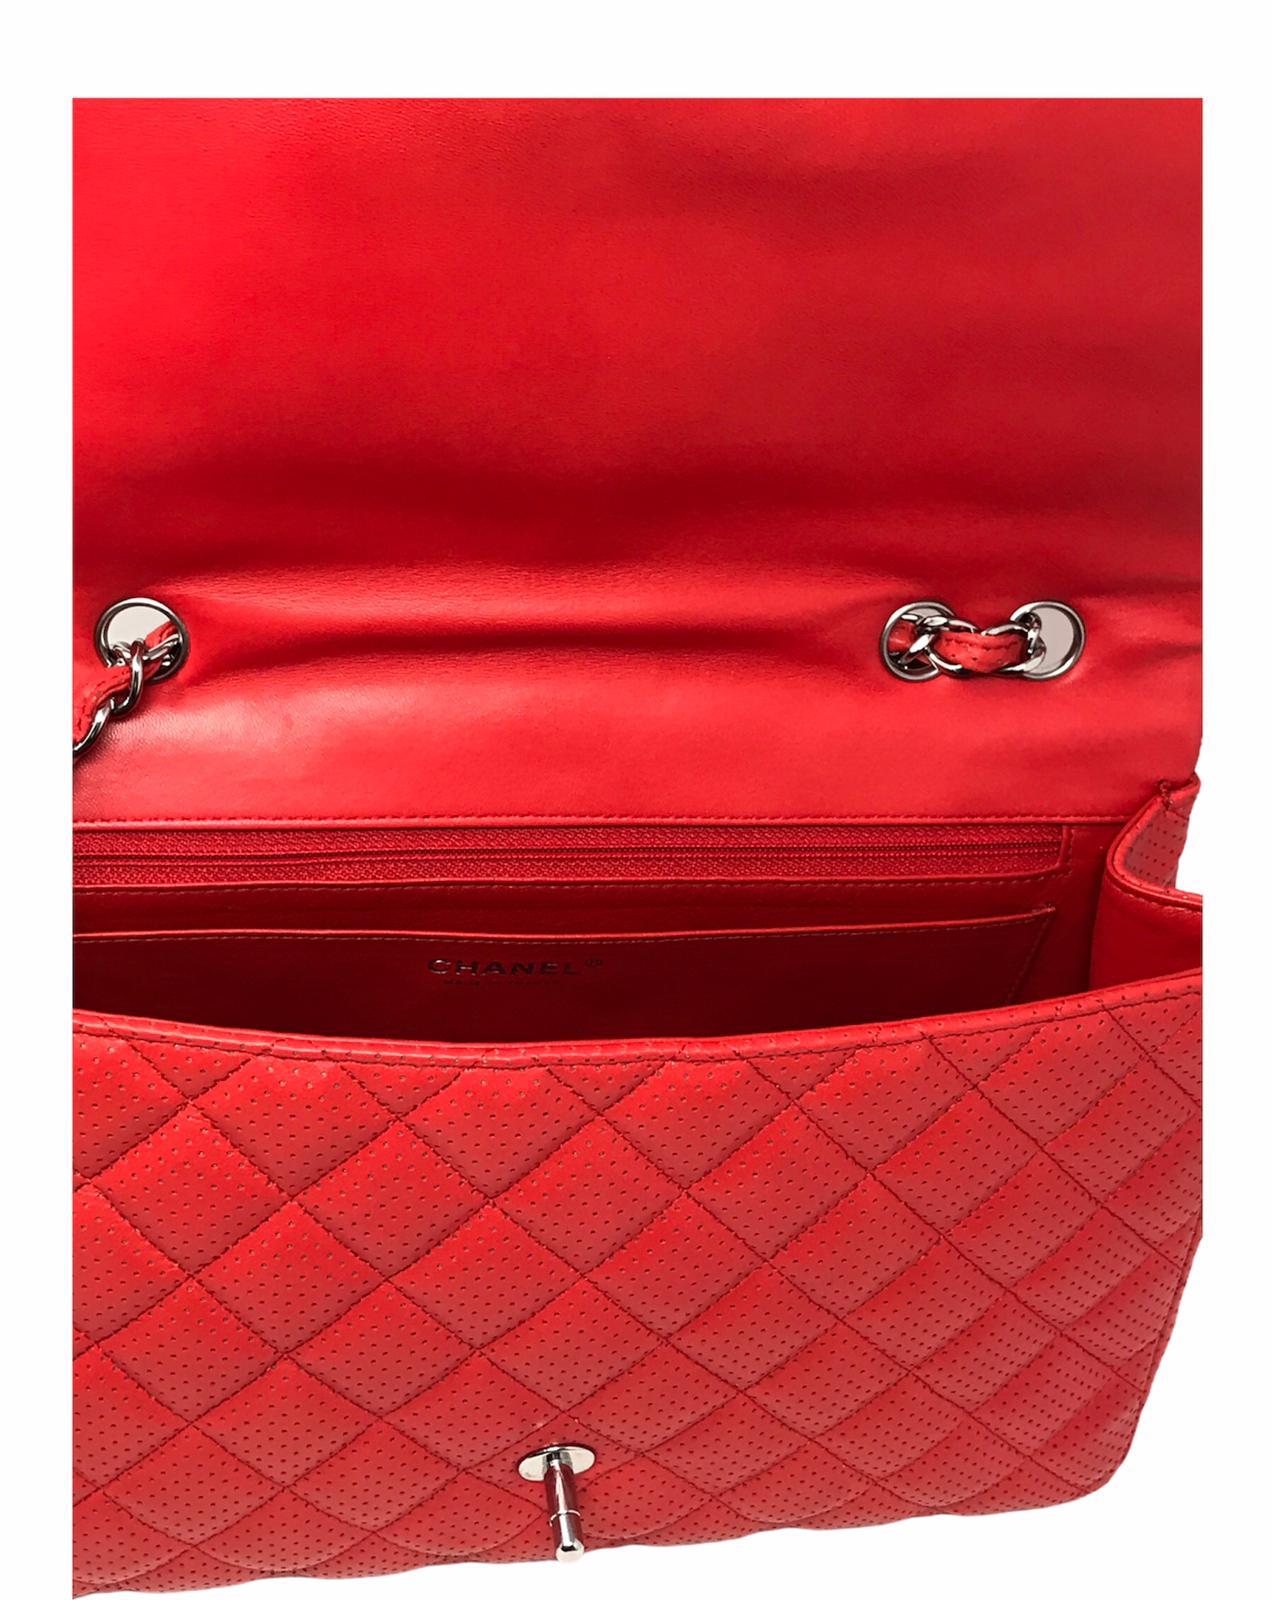 CHANEL Jumbo Red Timeless Limited Edition 2010 For Sale 2